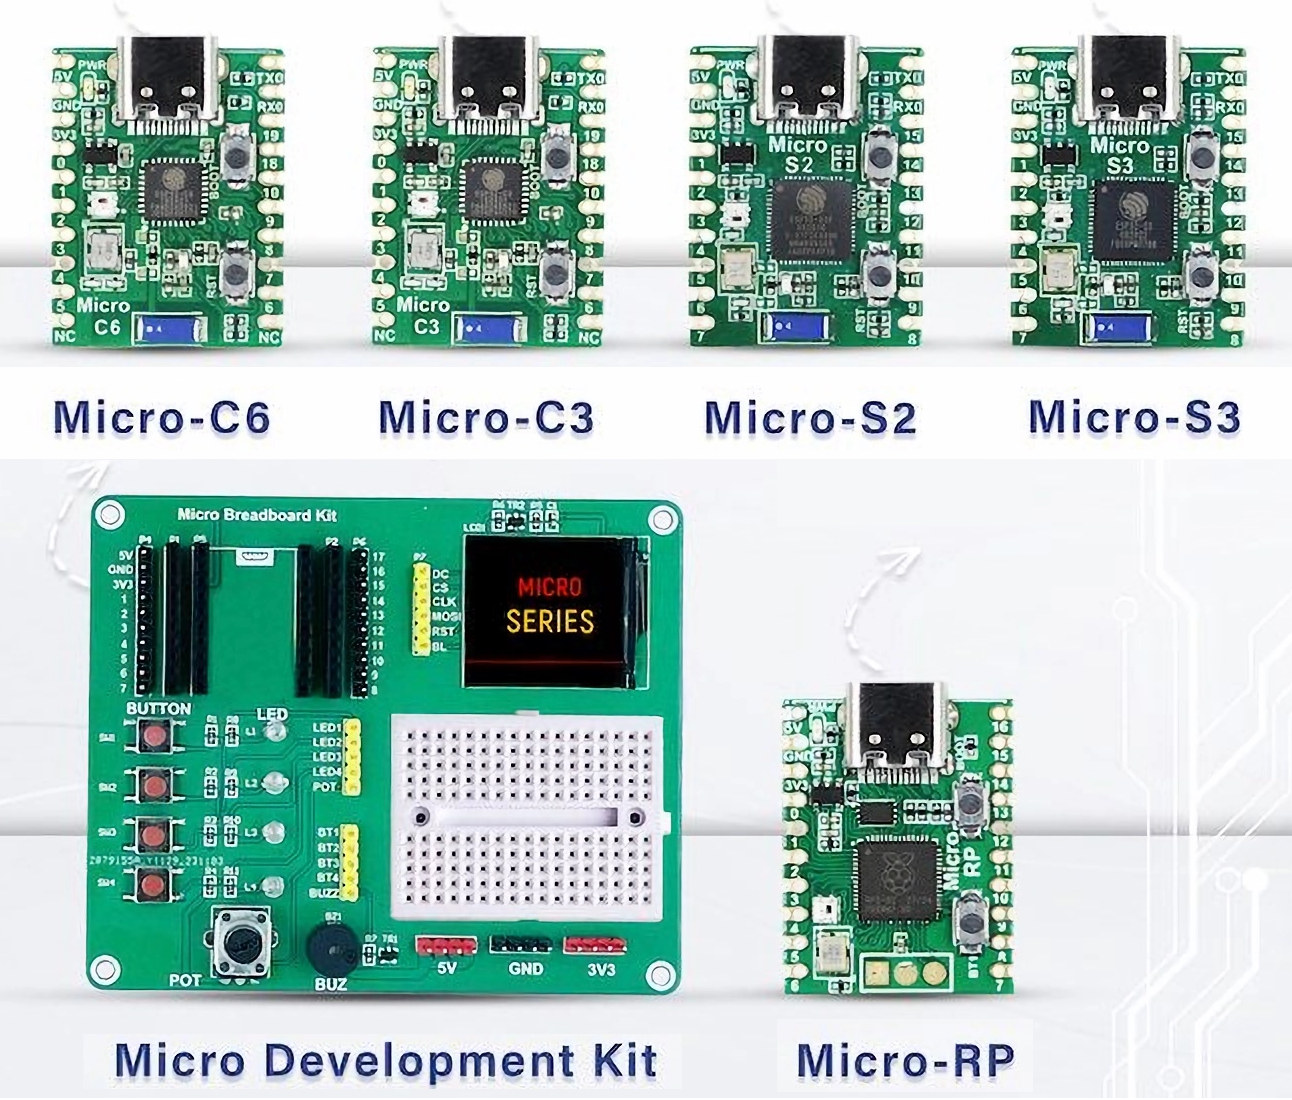 Microflex MCU board with ESP32 and RP2040 microcontrollers